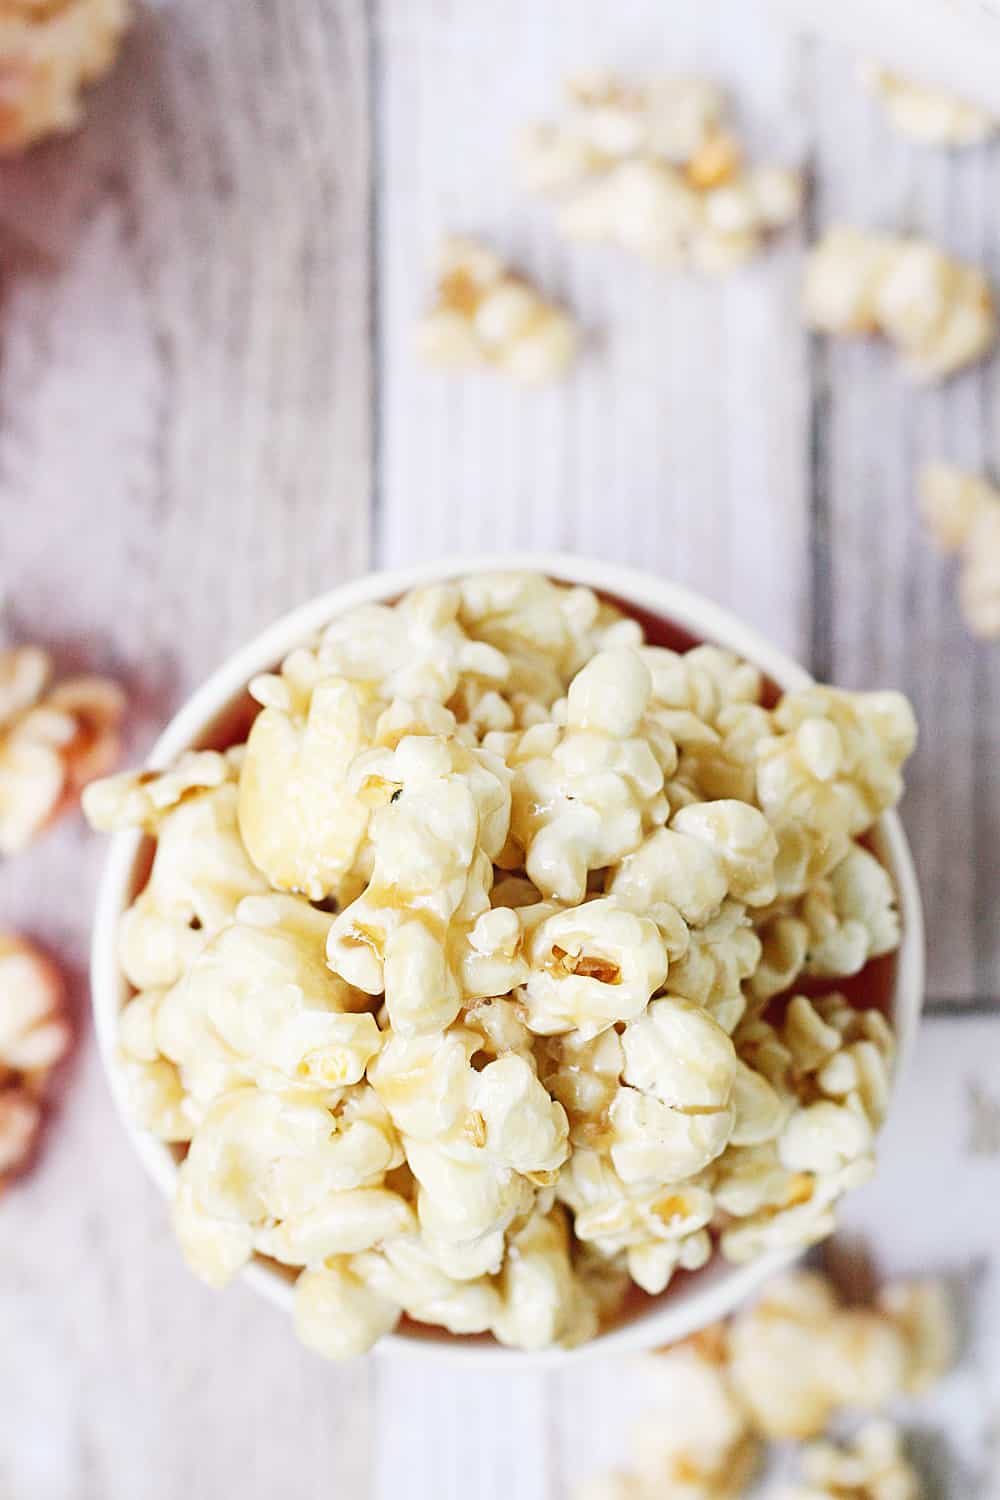 Easy Caramel Popcorn - Who doesn't love a quick, delicious, easy caramel popcorn recipe? The first time you try this easy homemade caramel popcorn, you'll be hooked! #popcorn #caramelpopcorn #halfscratched #caramel #dessert #easyrecipe #sweet